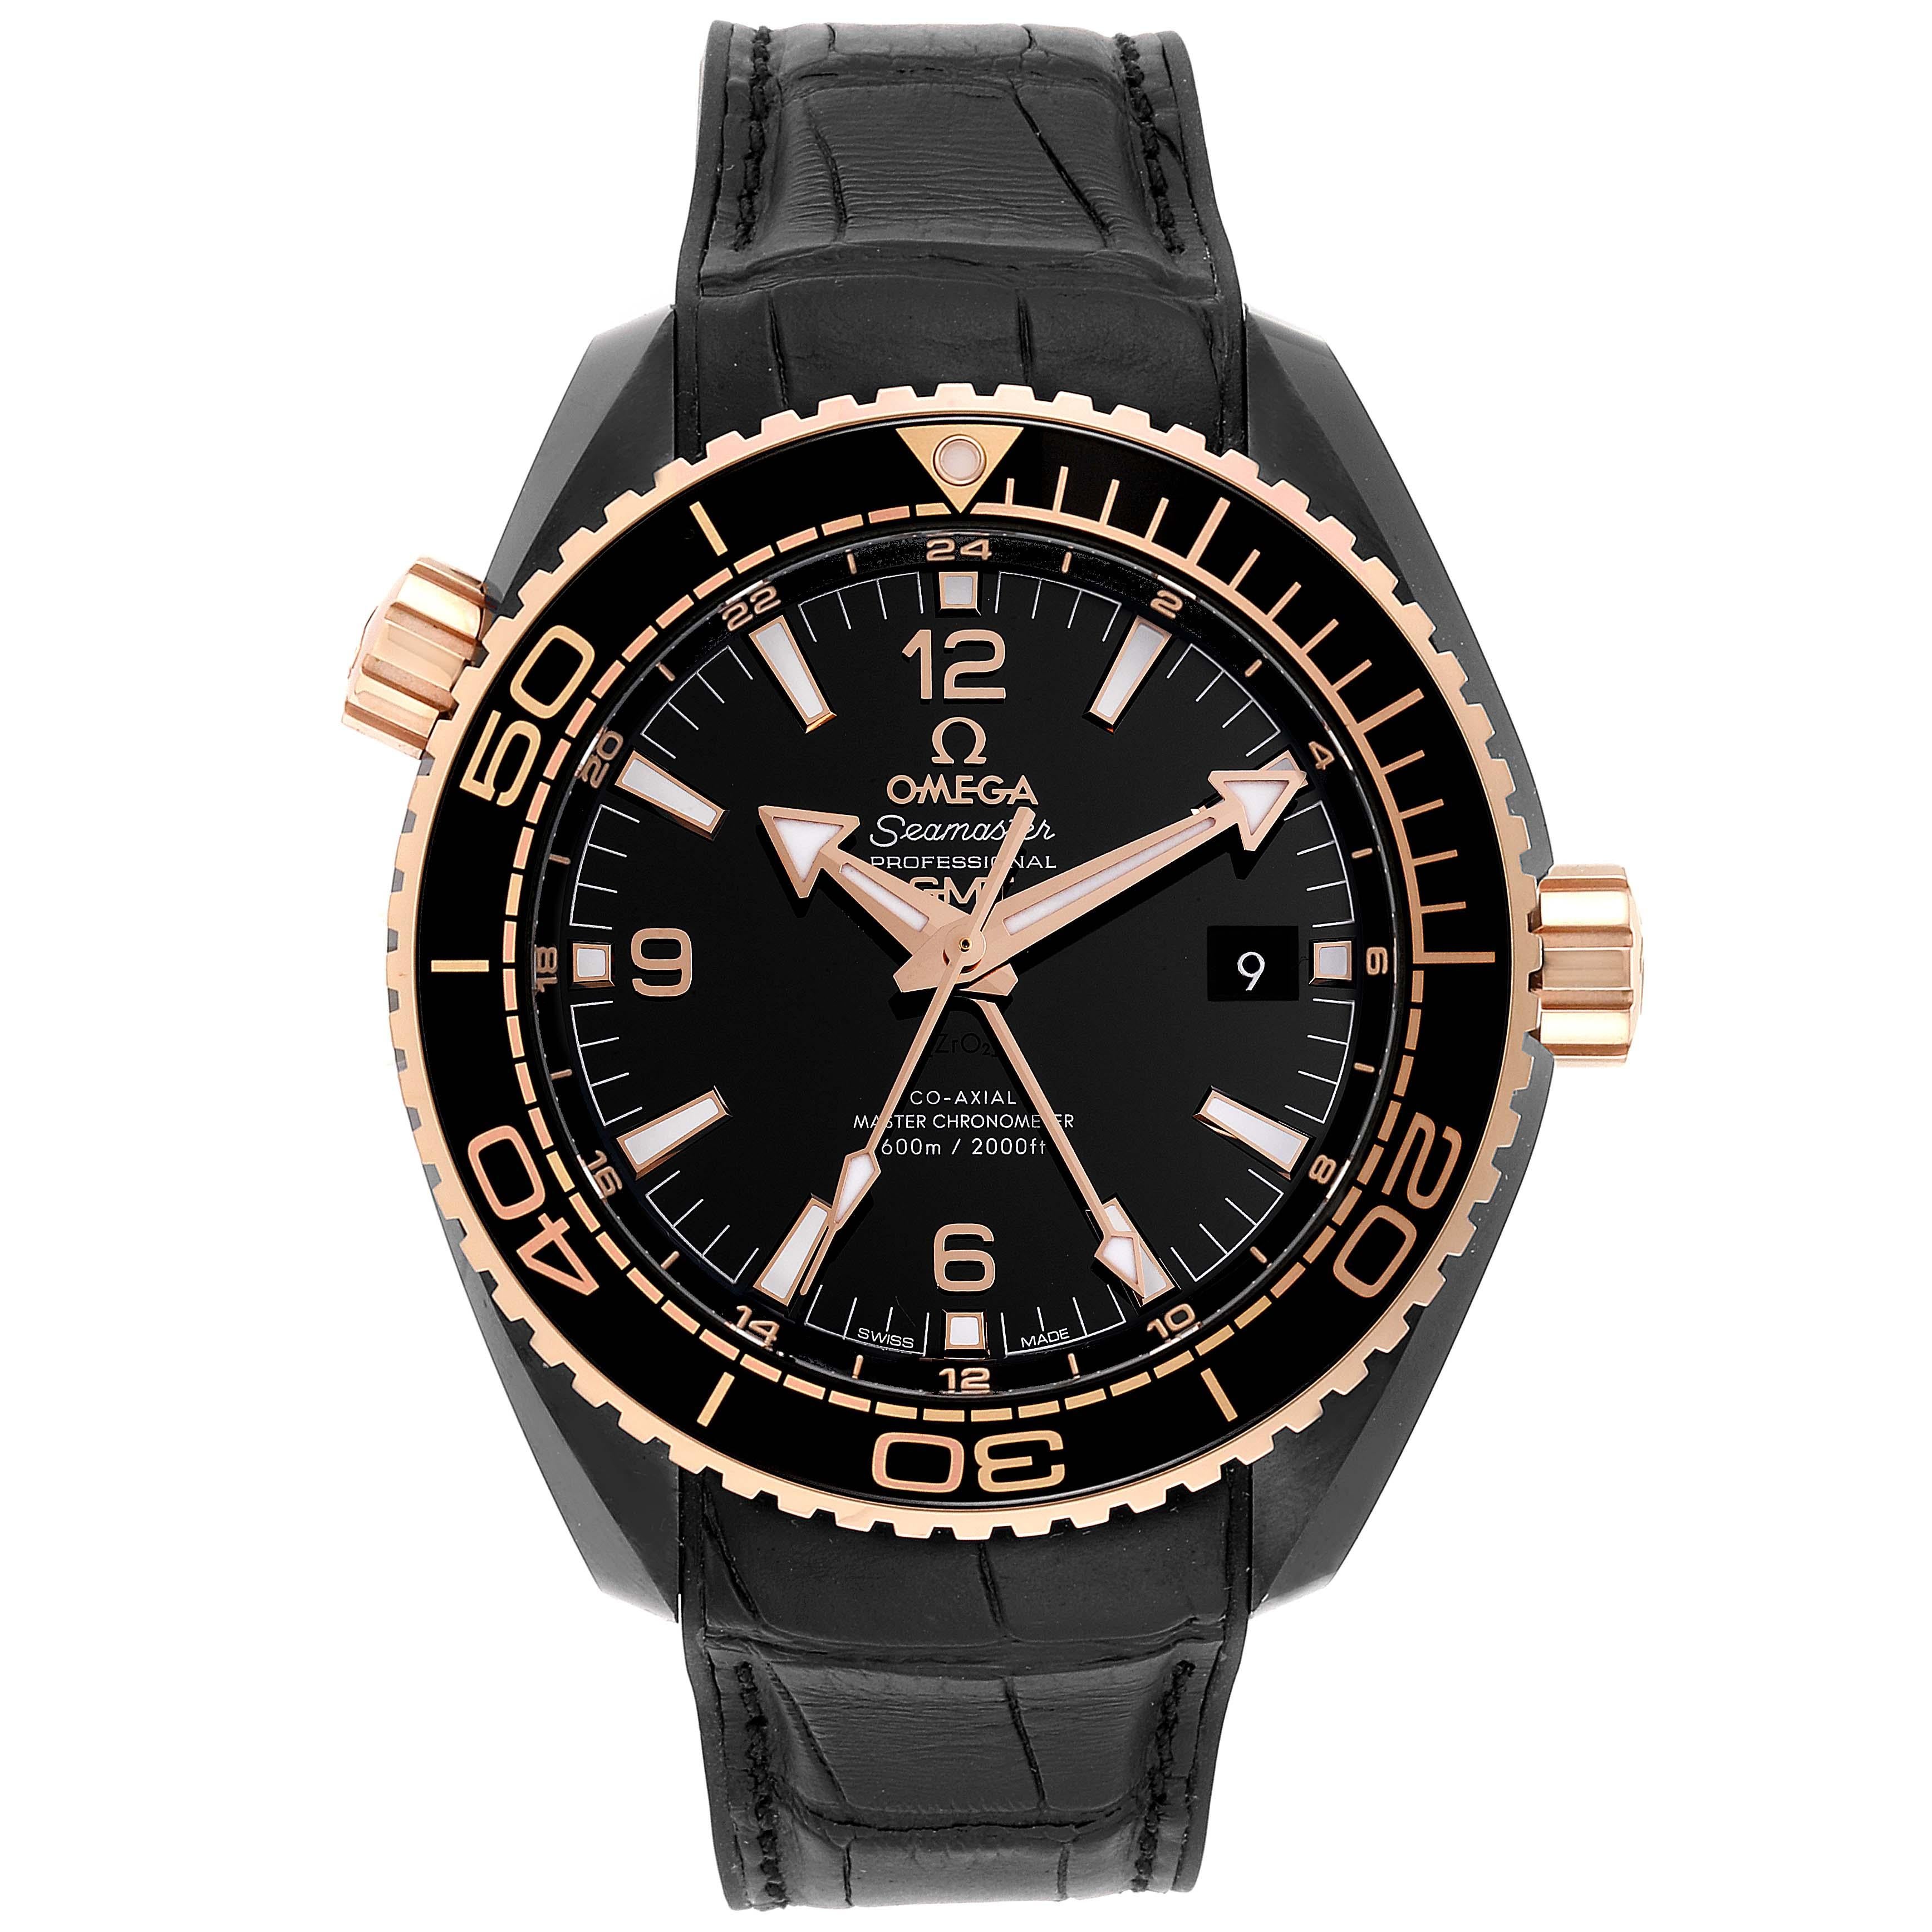 Omega Planet Ocean Deep Black Ceramic GMT Watch 215.63.46.22.01.001 Unworn. Automatic self-winding movement with Co-Axial escapement. Certified Master Chronometer, approved by METAS,resistant to magnetic fields reaching 15,000 gauss. GMTand time